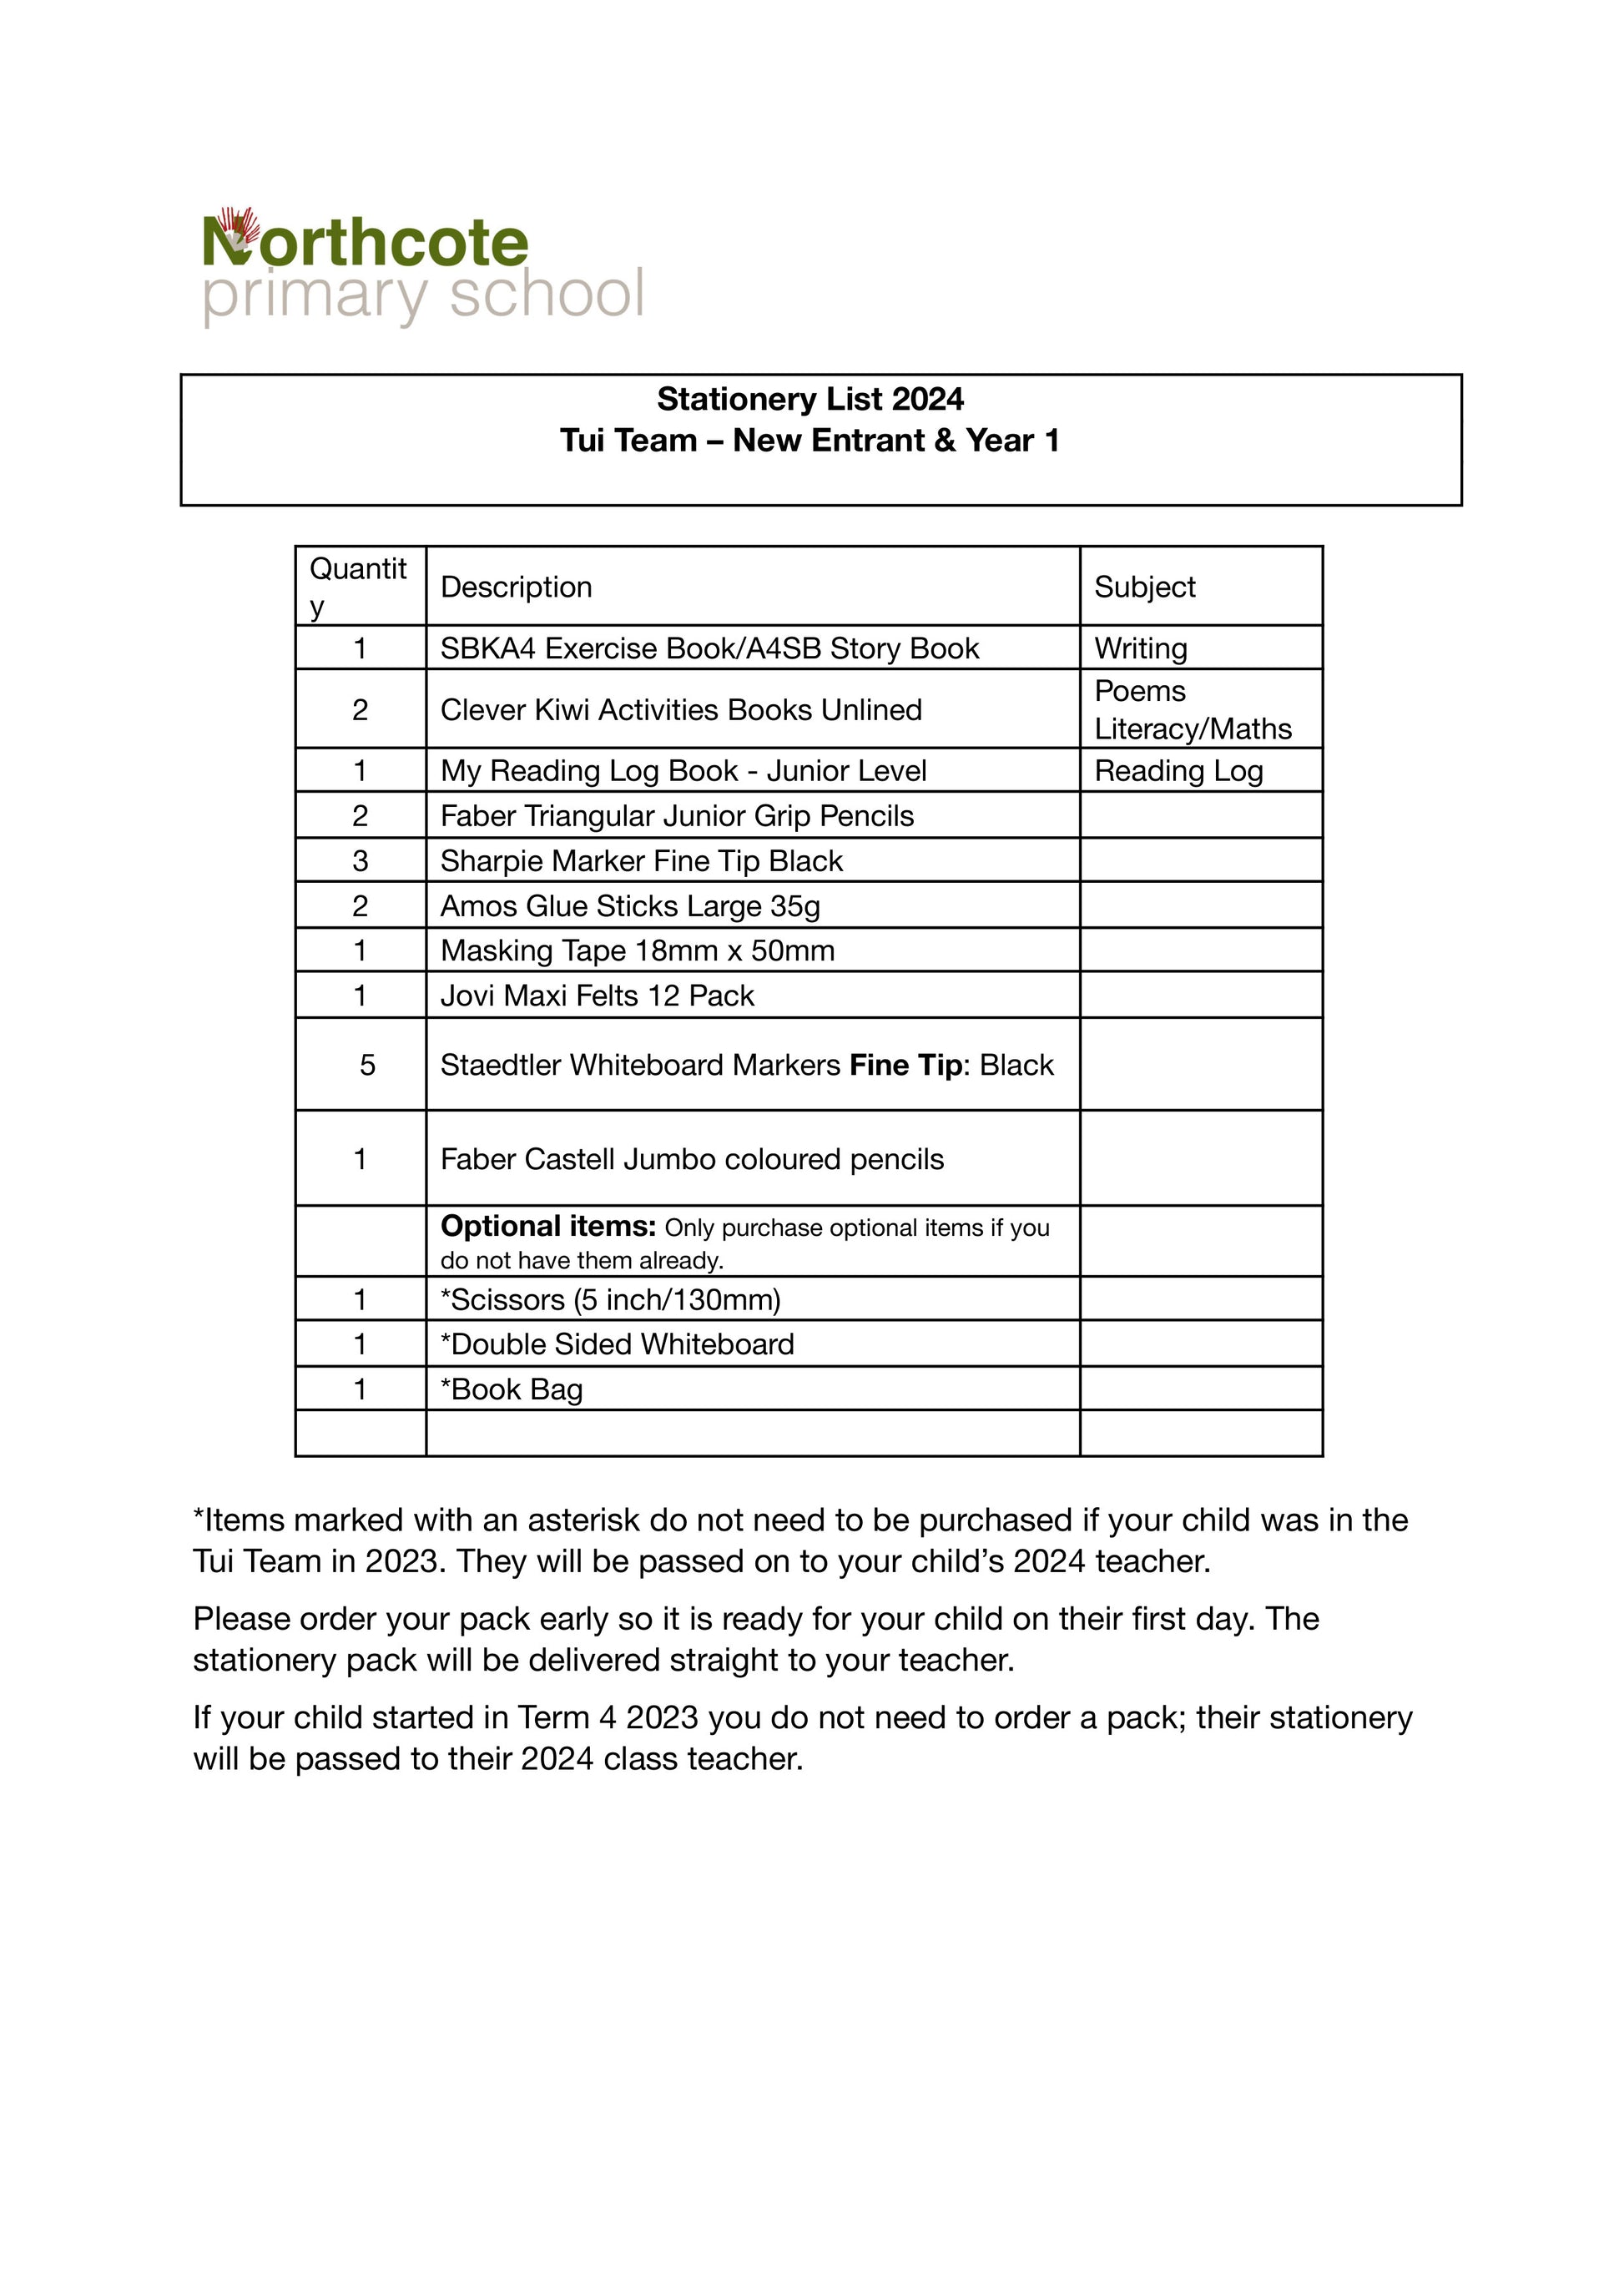 Northcote Primary School Stationery List 2024 New Entrant & Year 1